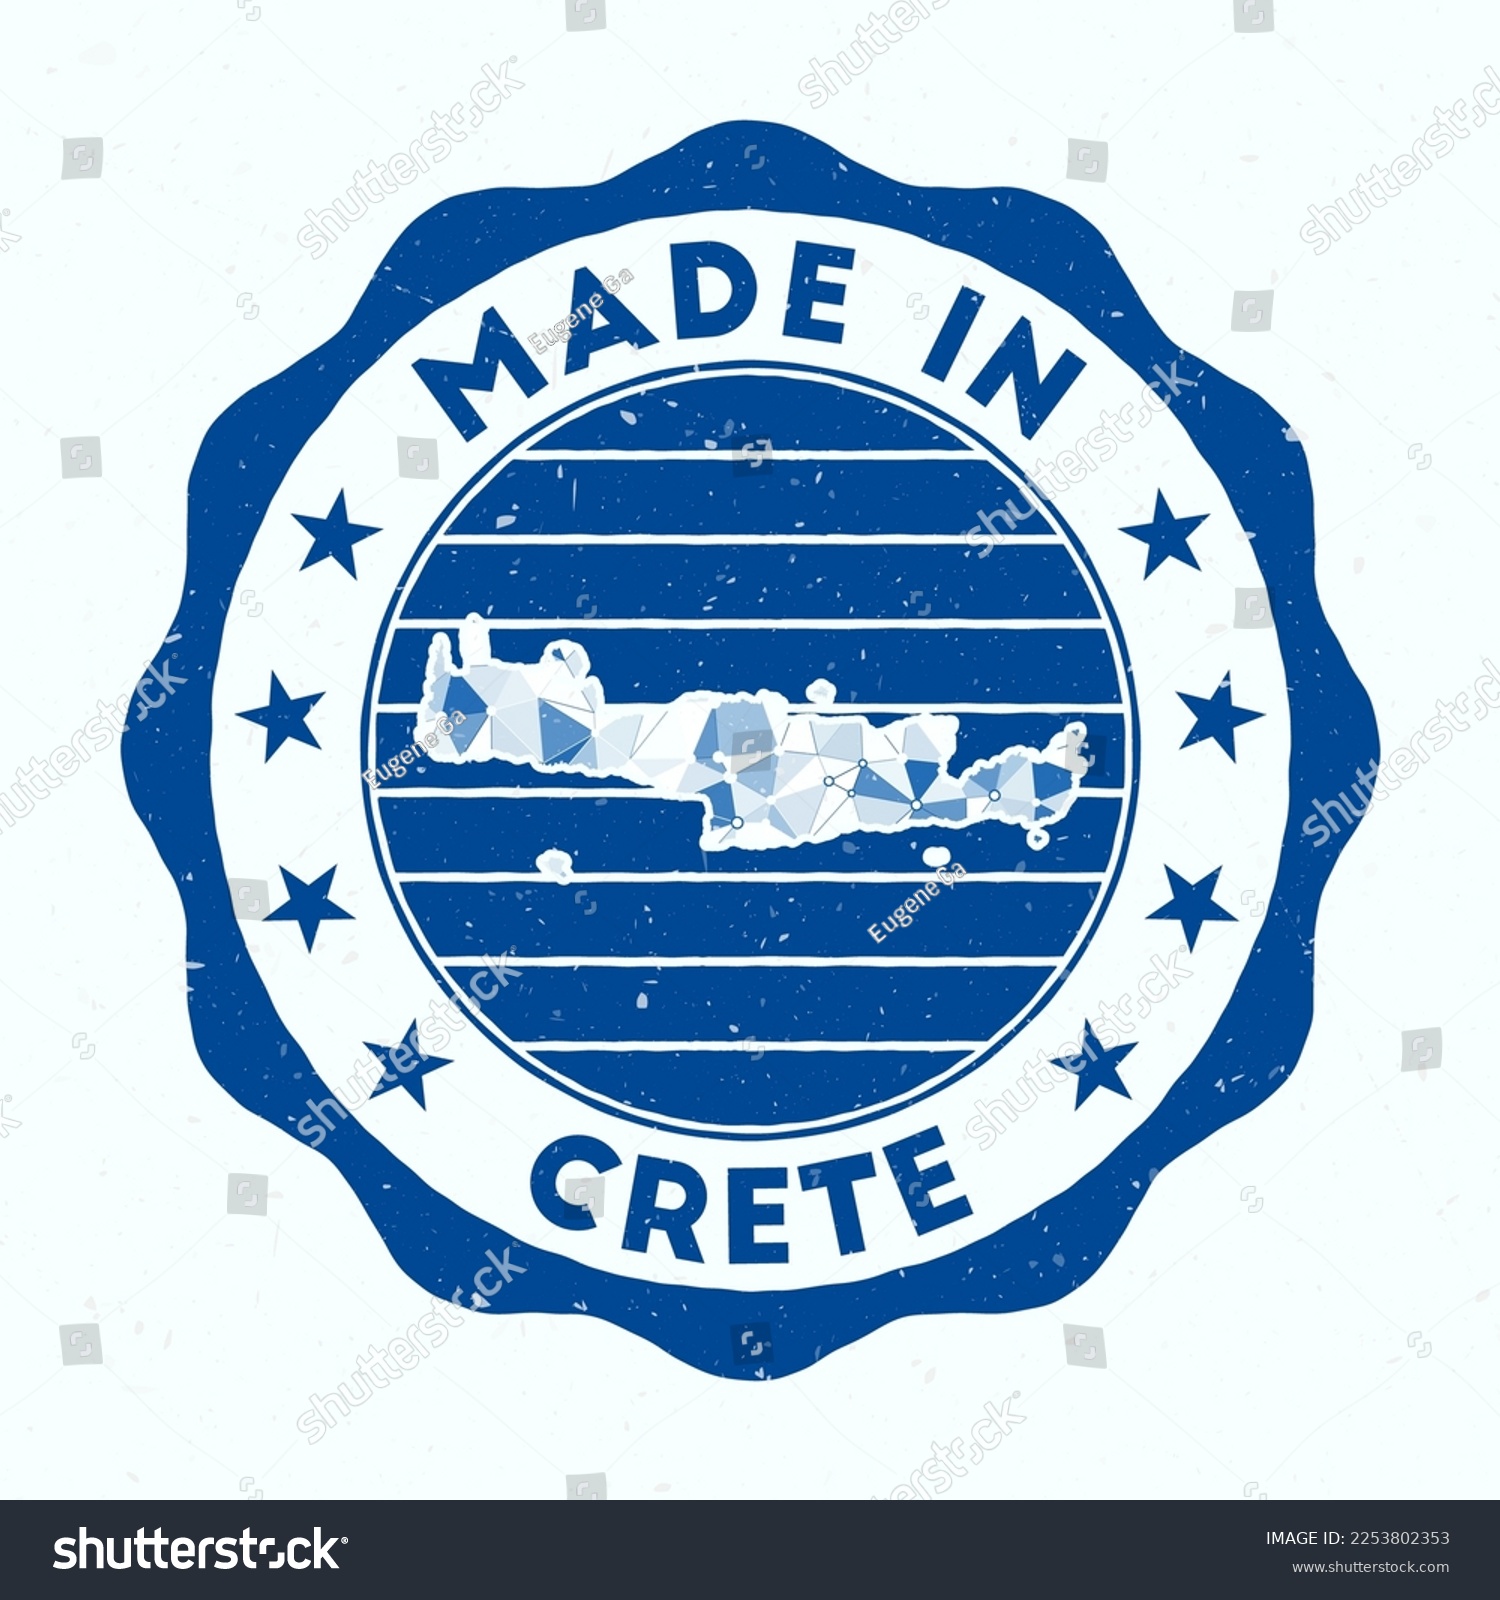 SVG of Made In Crete. Island round stamp. Seal of Crete with border shape. Vintage badge with circular text and stars. Vector illustration. svg